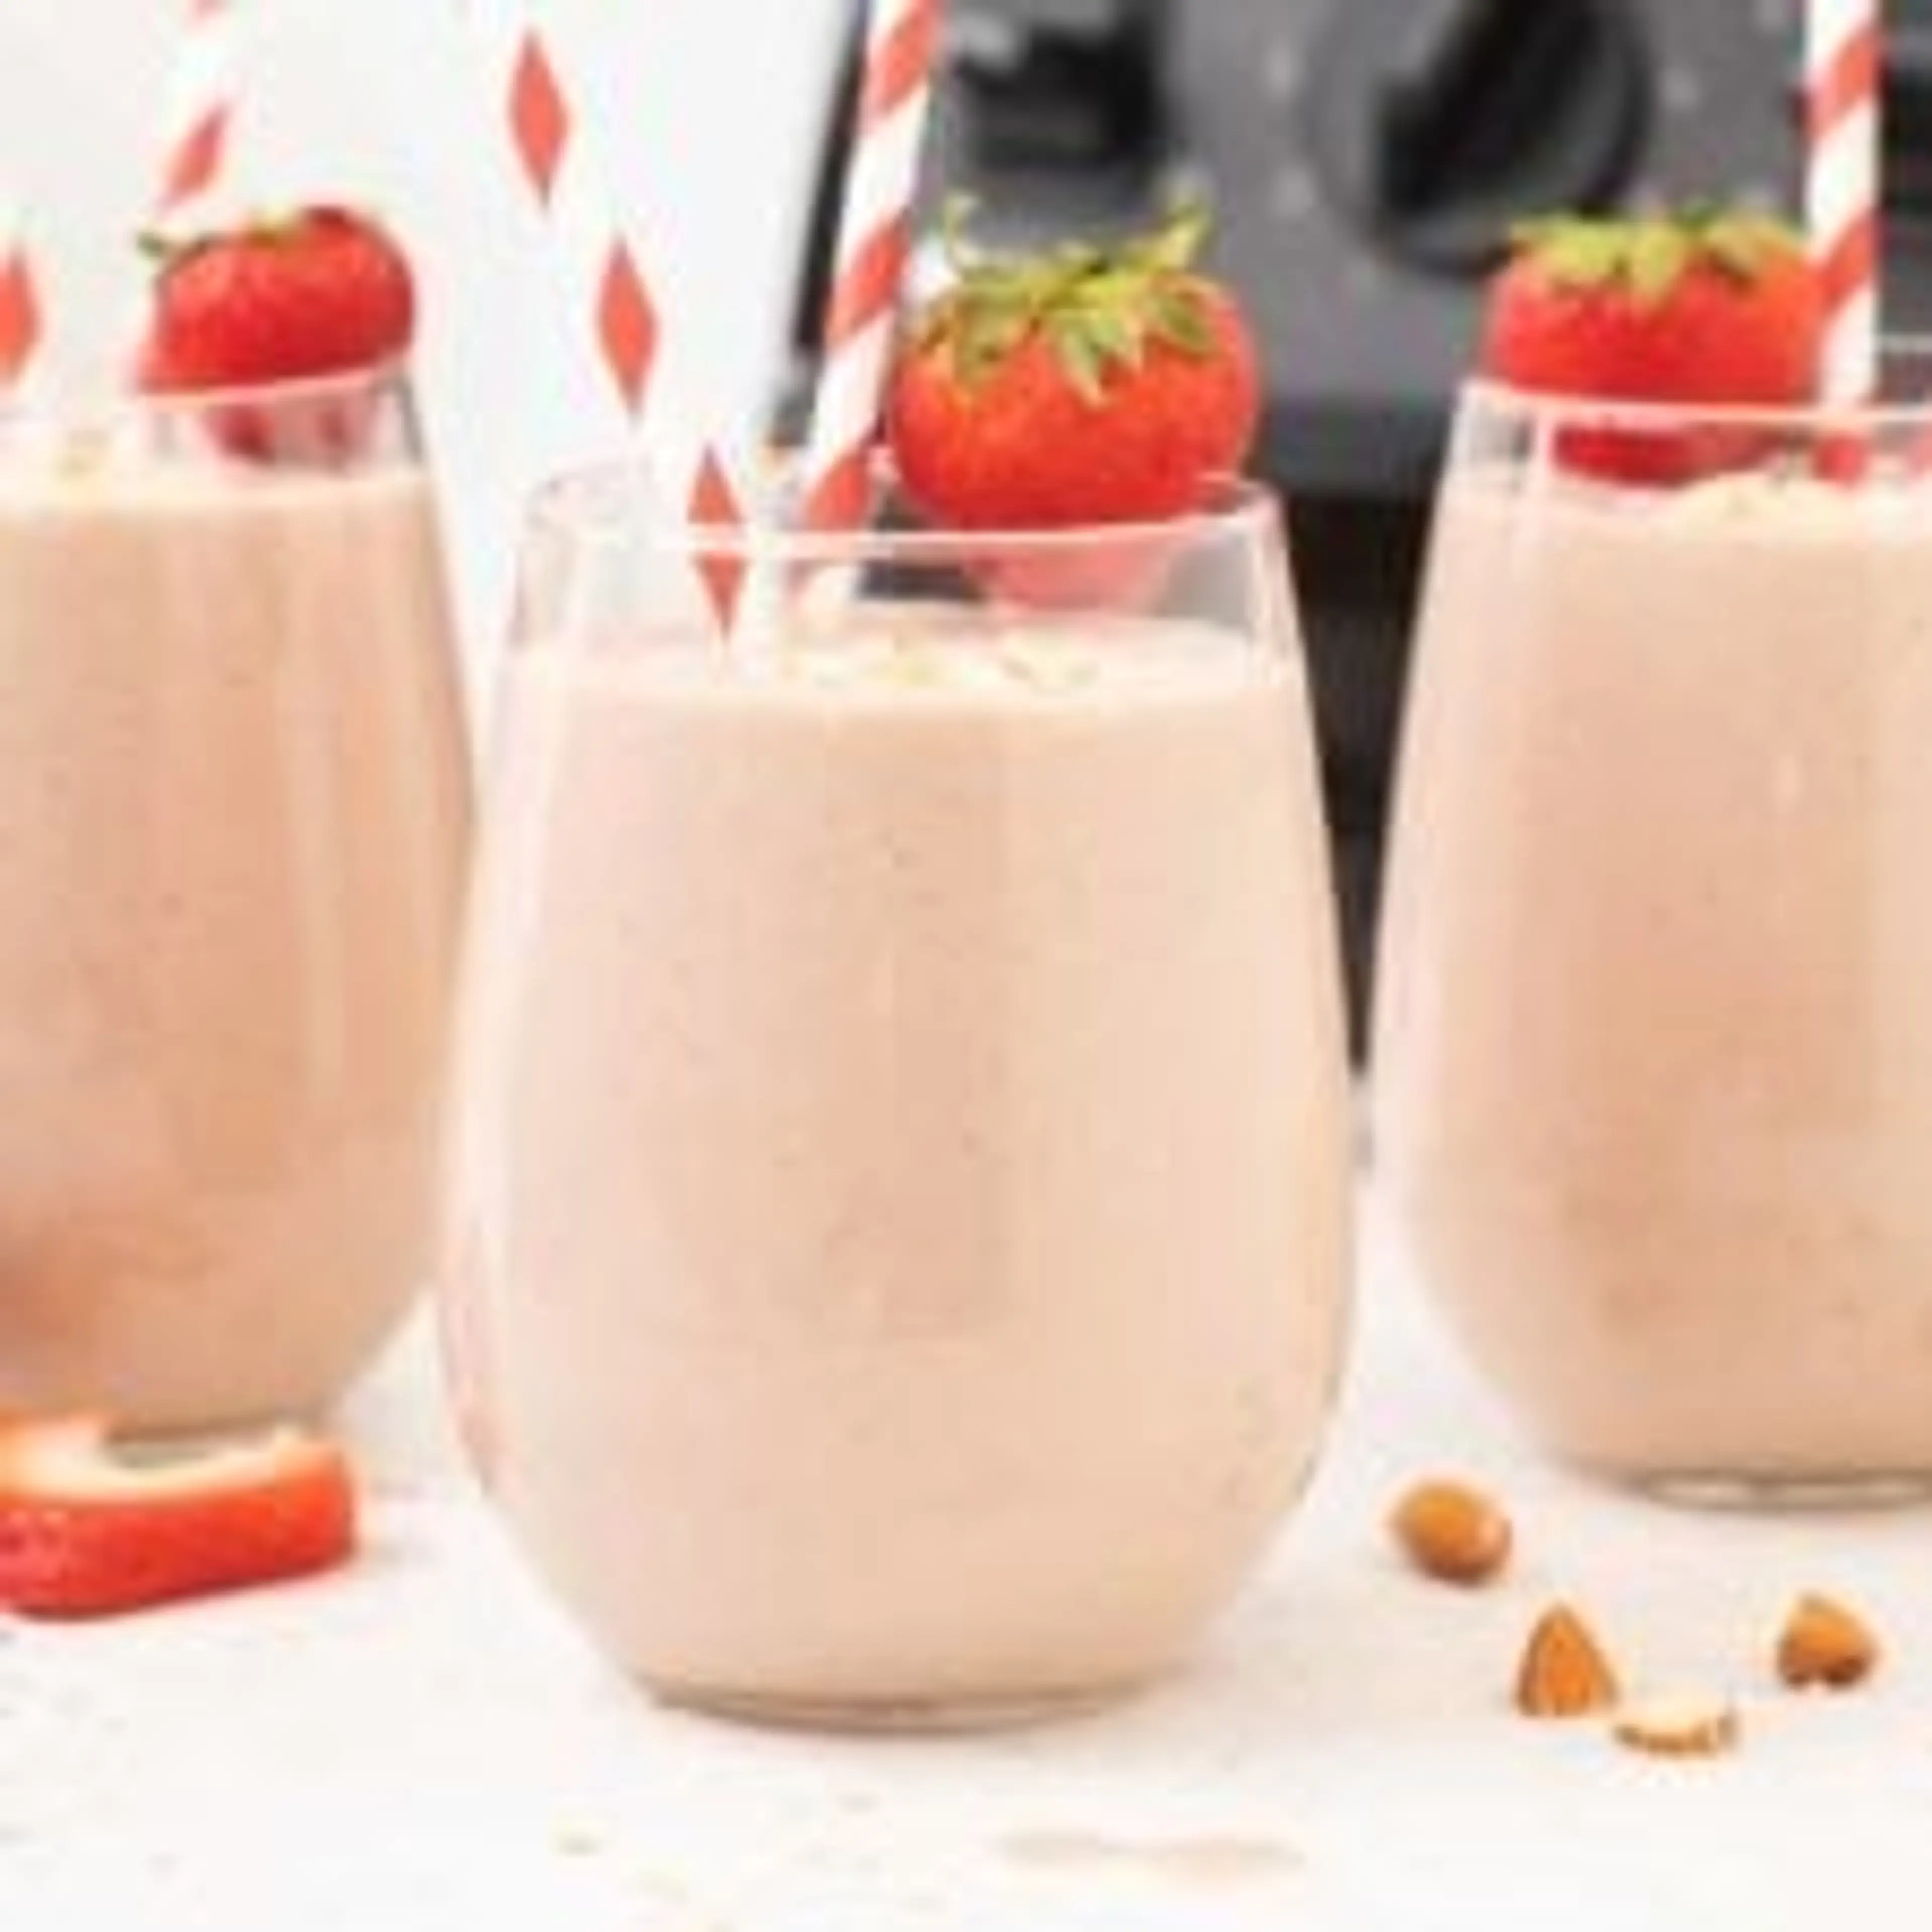 Oat Milk Smoothie with Strawberry and Banana